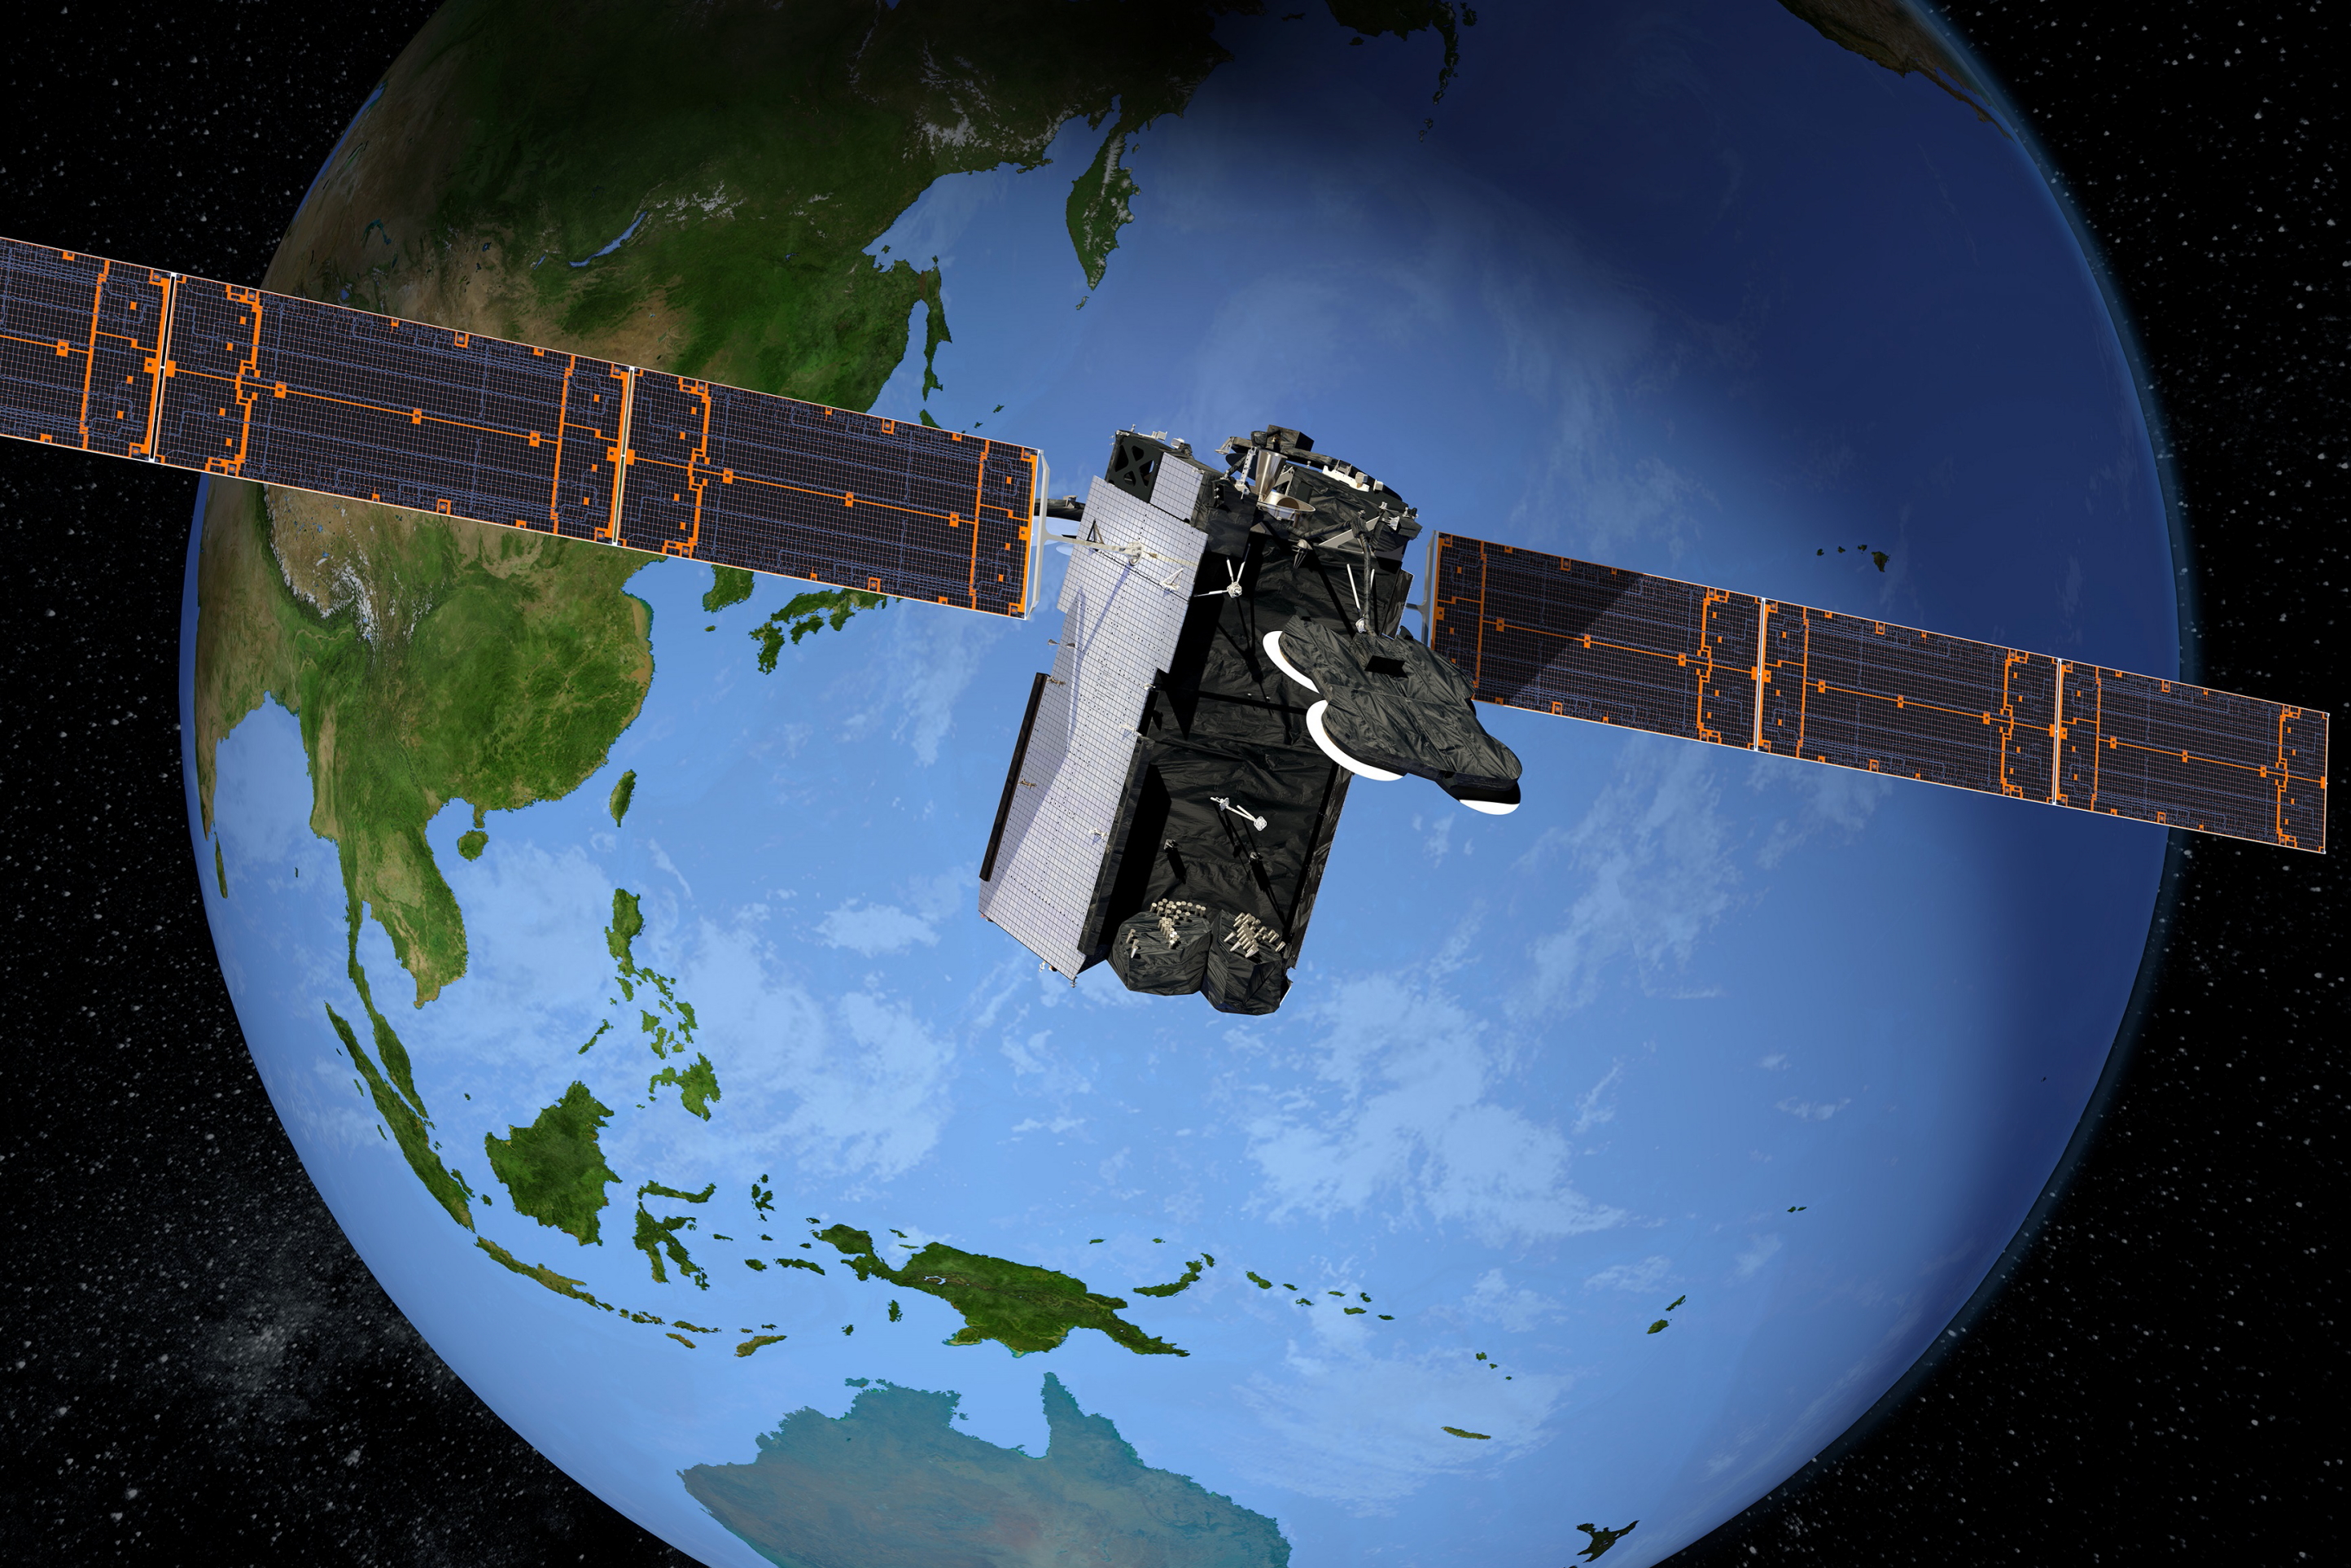 The Boeing-built satellite called JCSAT-18/Kacific will deliver internet services to a potential market comprising hundreds of millions of people in more than 25 countries, including remote islands in the Pacific and the far eastern part of Russia. Click to enlarge.